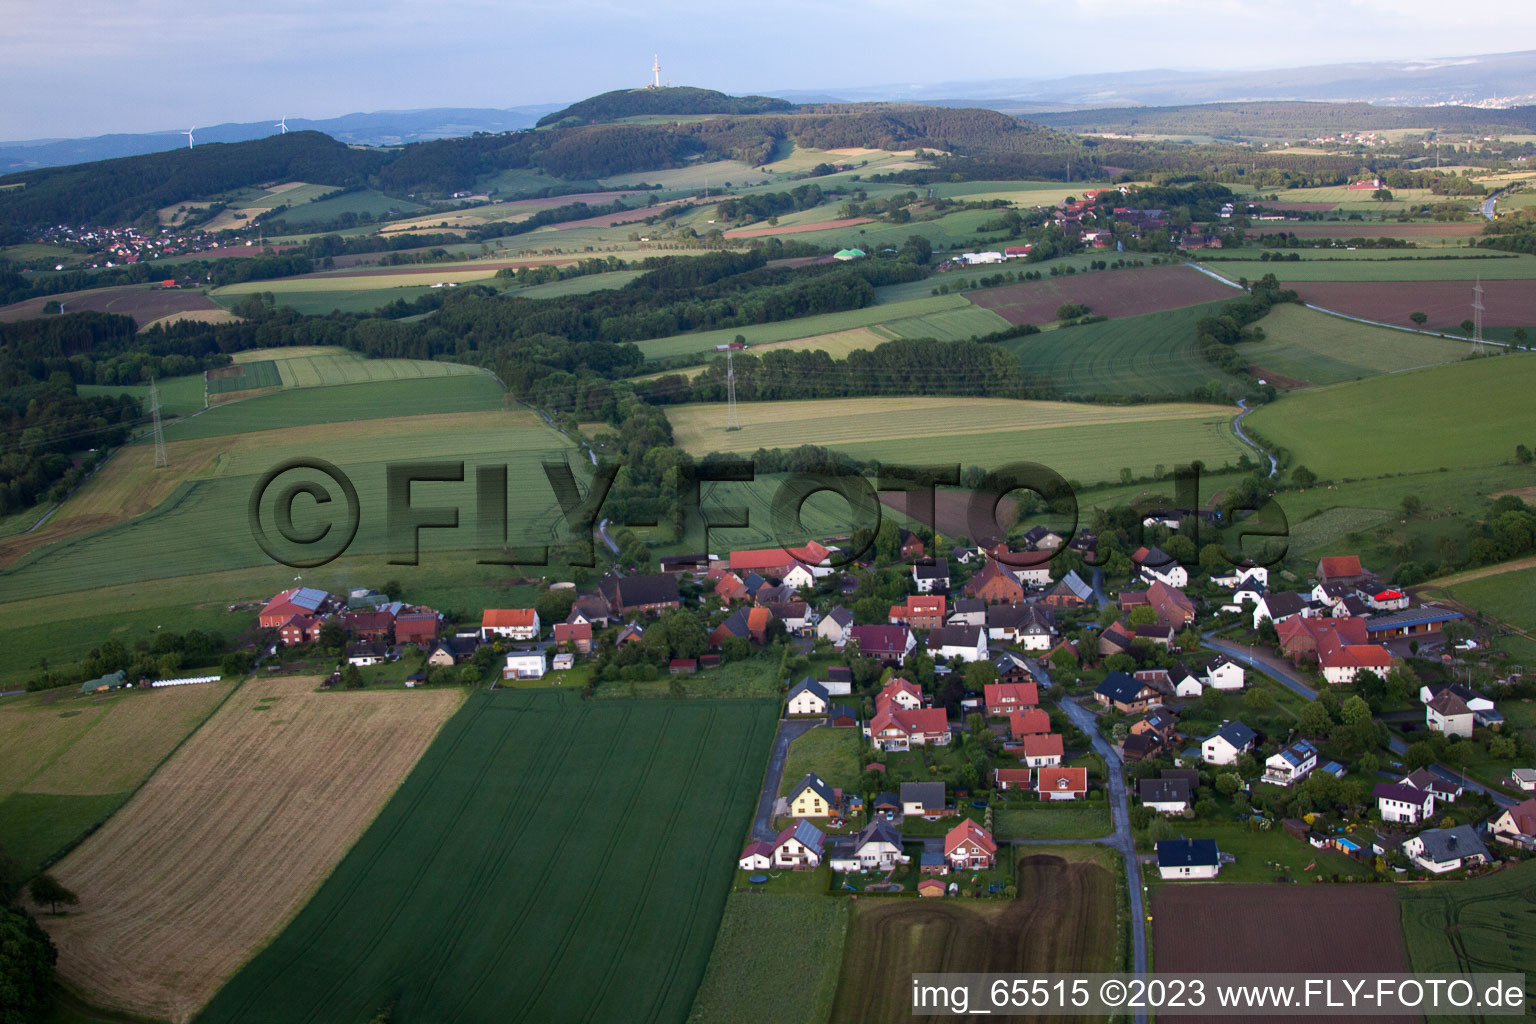 Oblique view of Niese in the state North Rhine-Westphalia, Germany